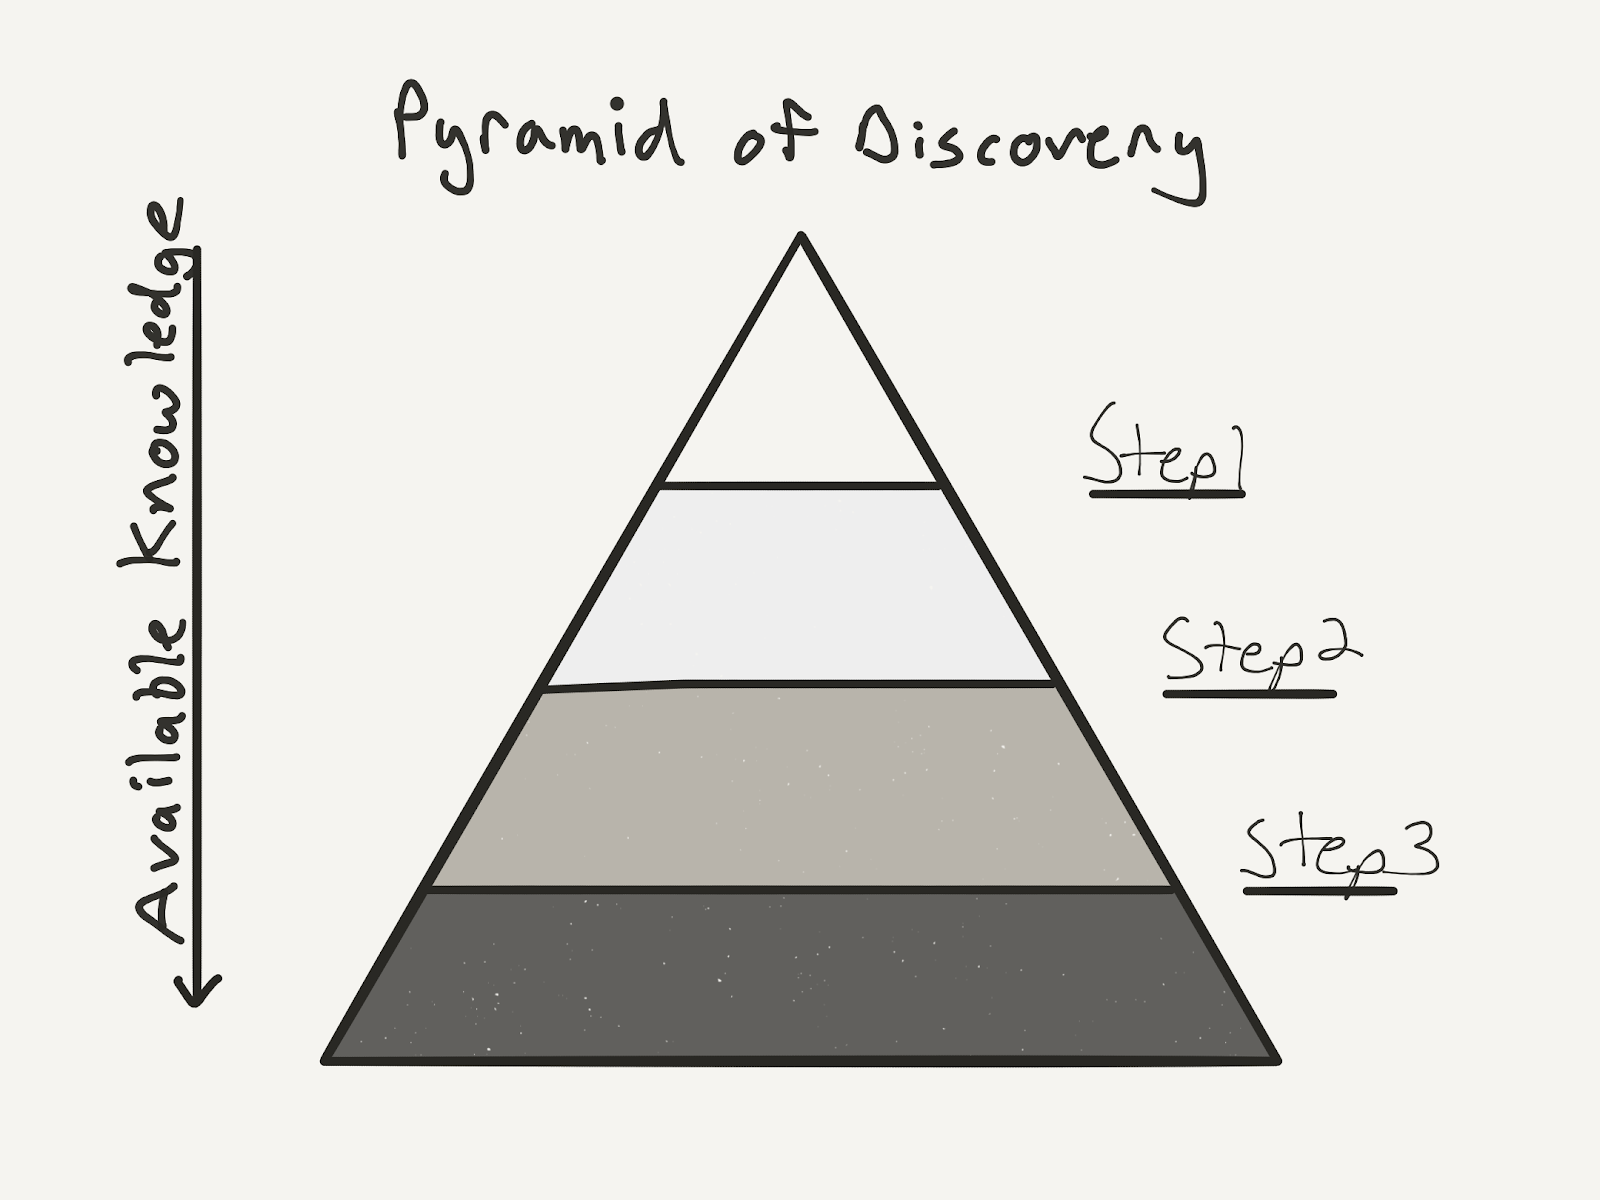 Pyramid of Discovery. More knowledge becomes available to you after each step you take.